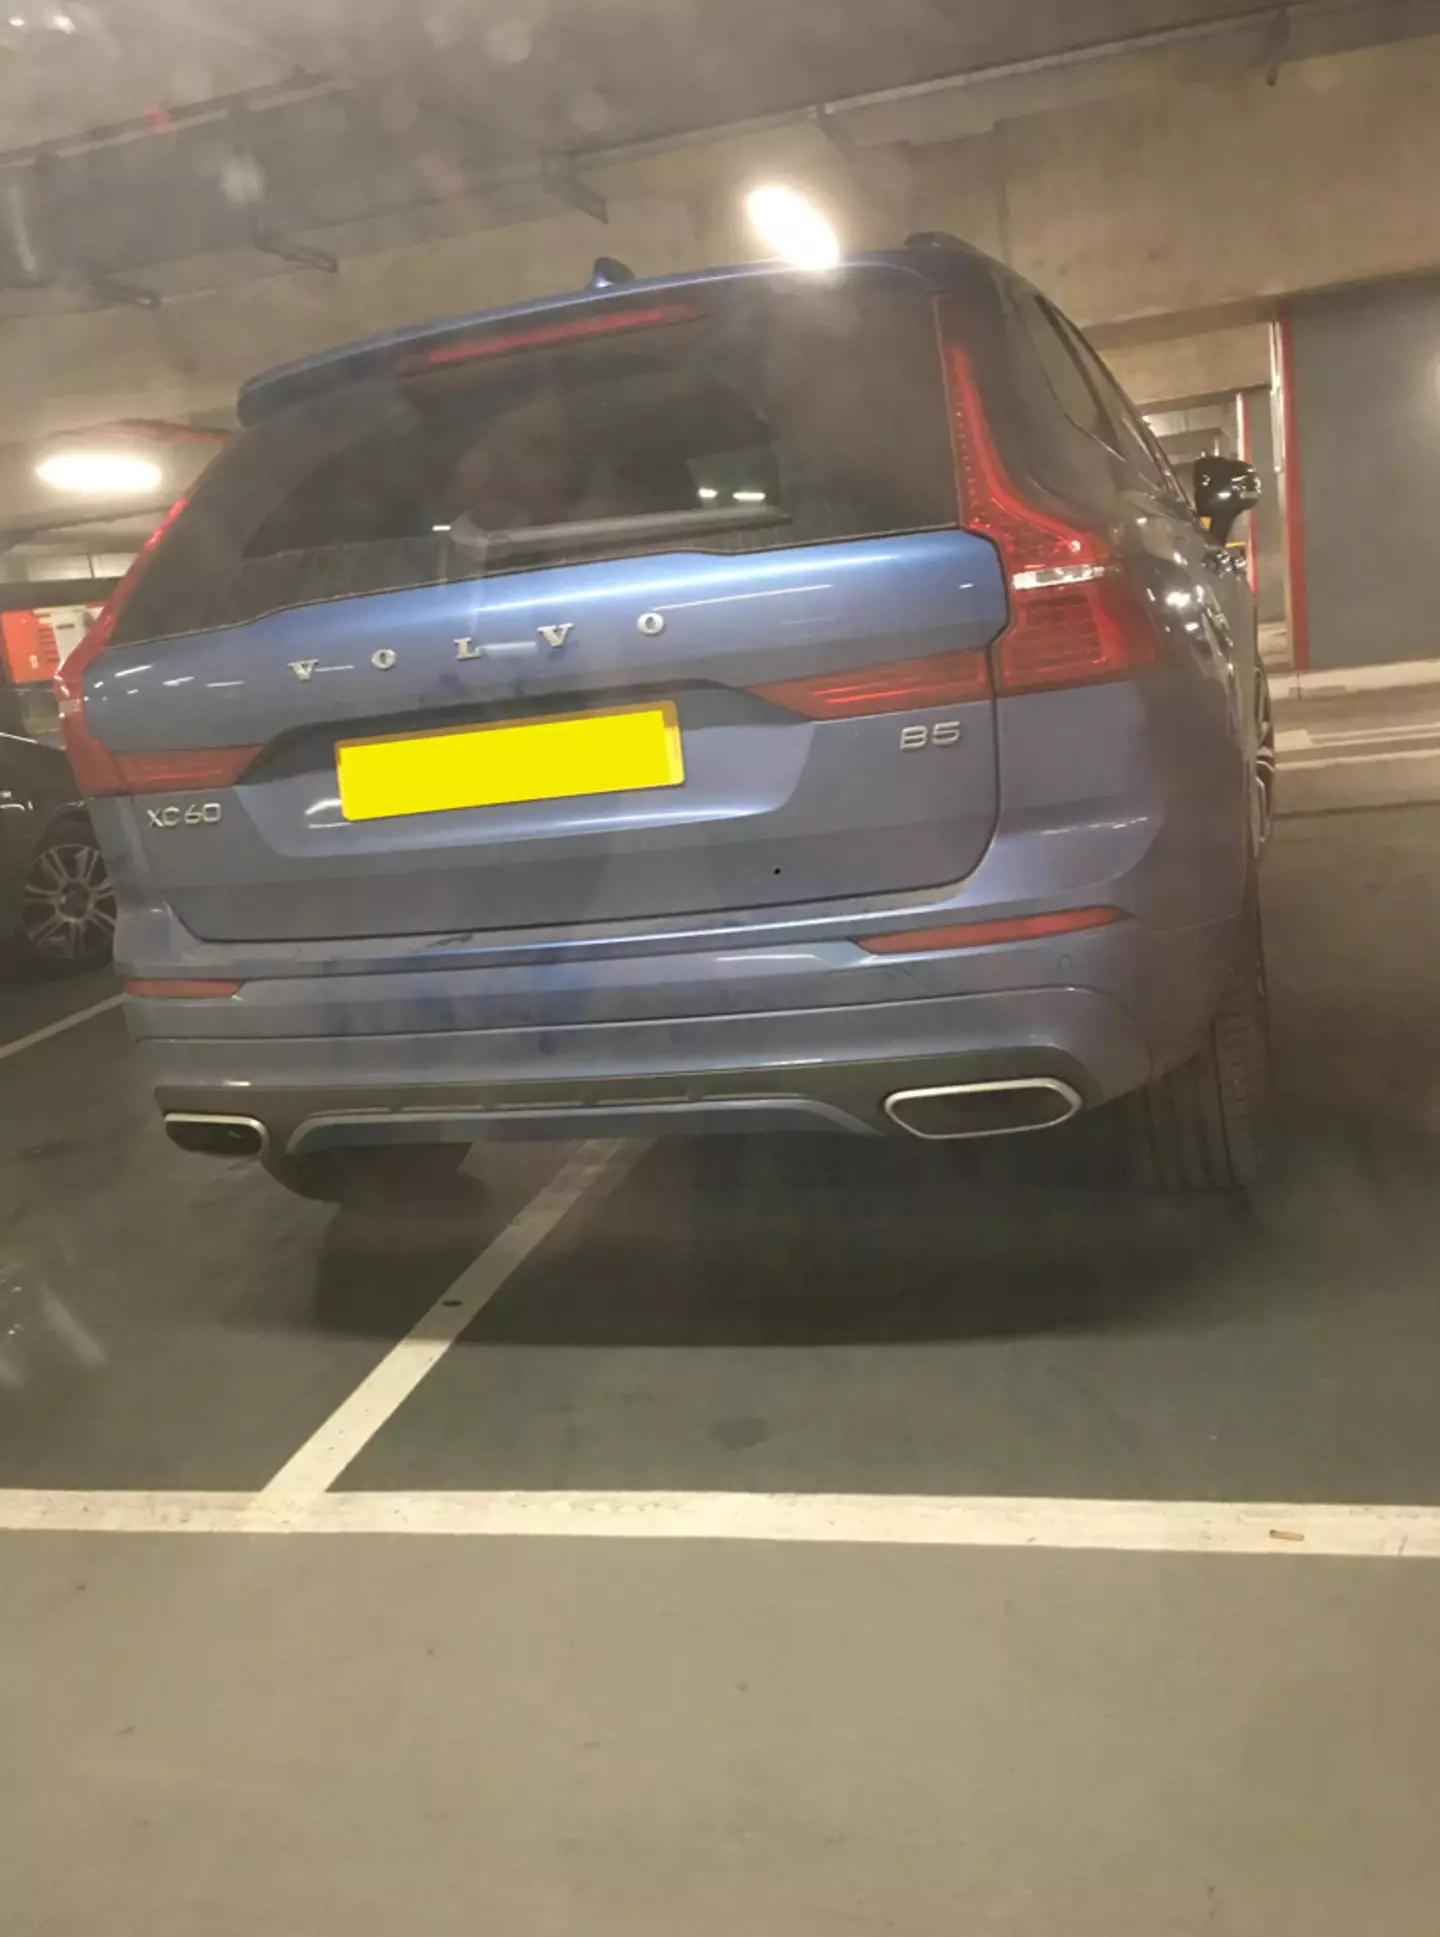 The car was parked in-between two spaces.